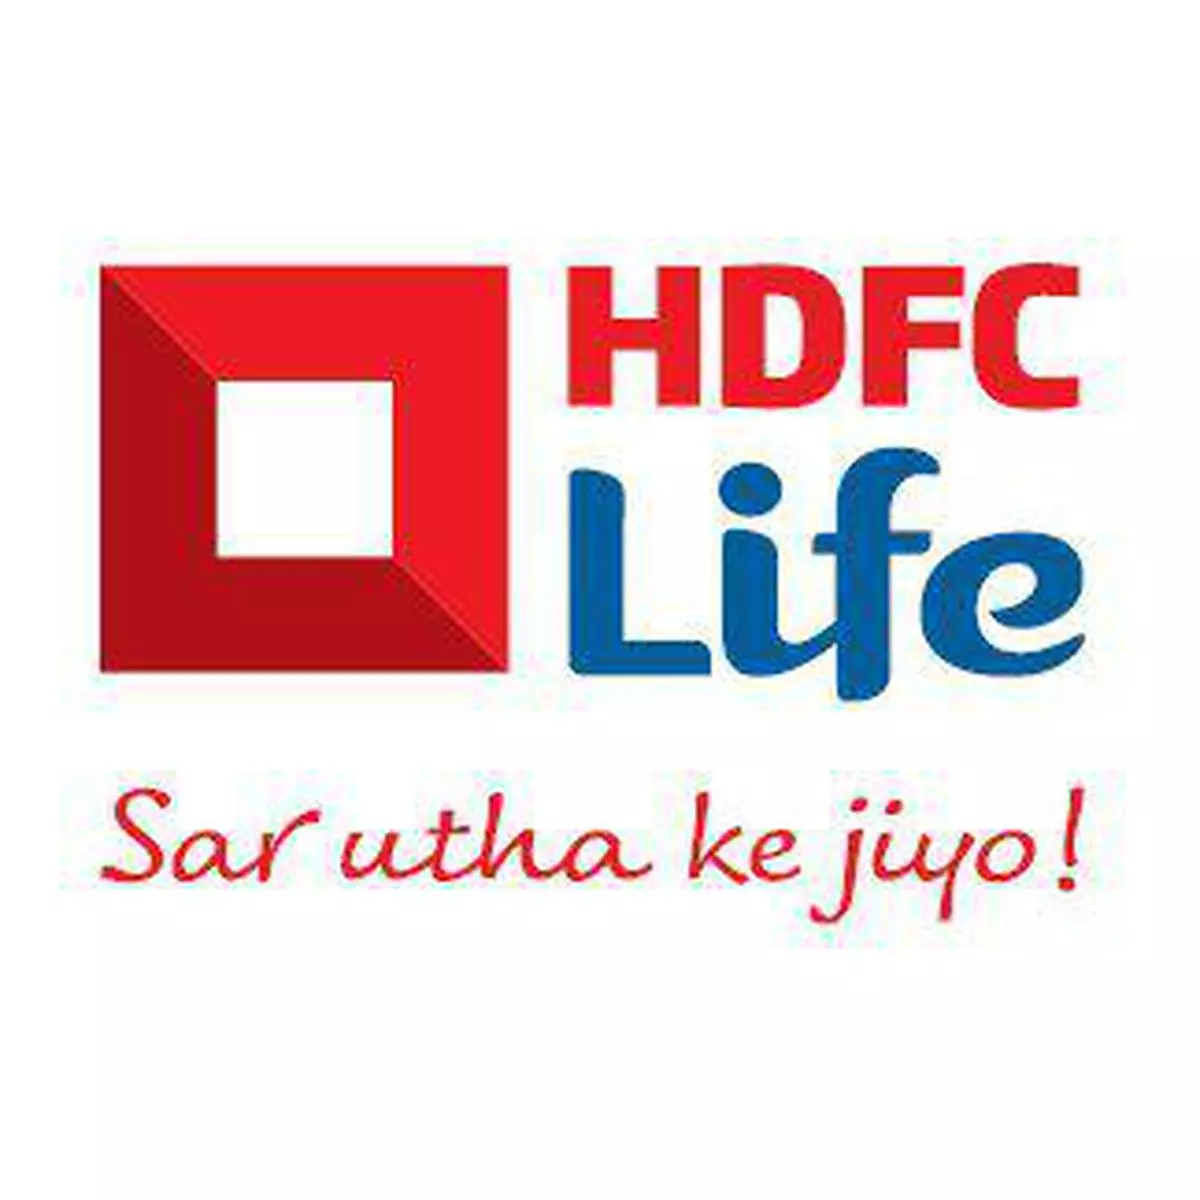 Maintaining a consistent growth trajectory enabled HDFC Life Insurance to maintain its market leadership as a ‘Top 3 life insurer’.